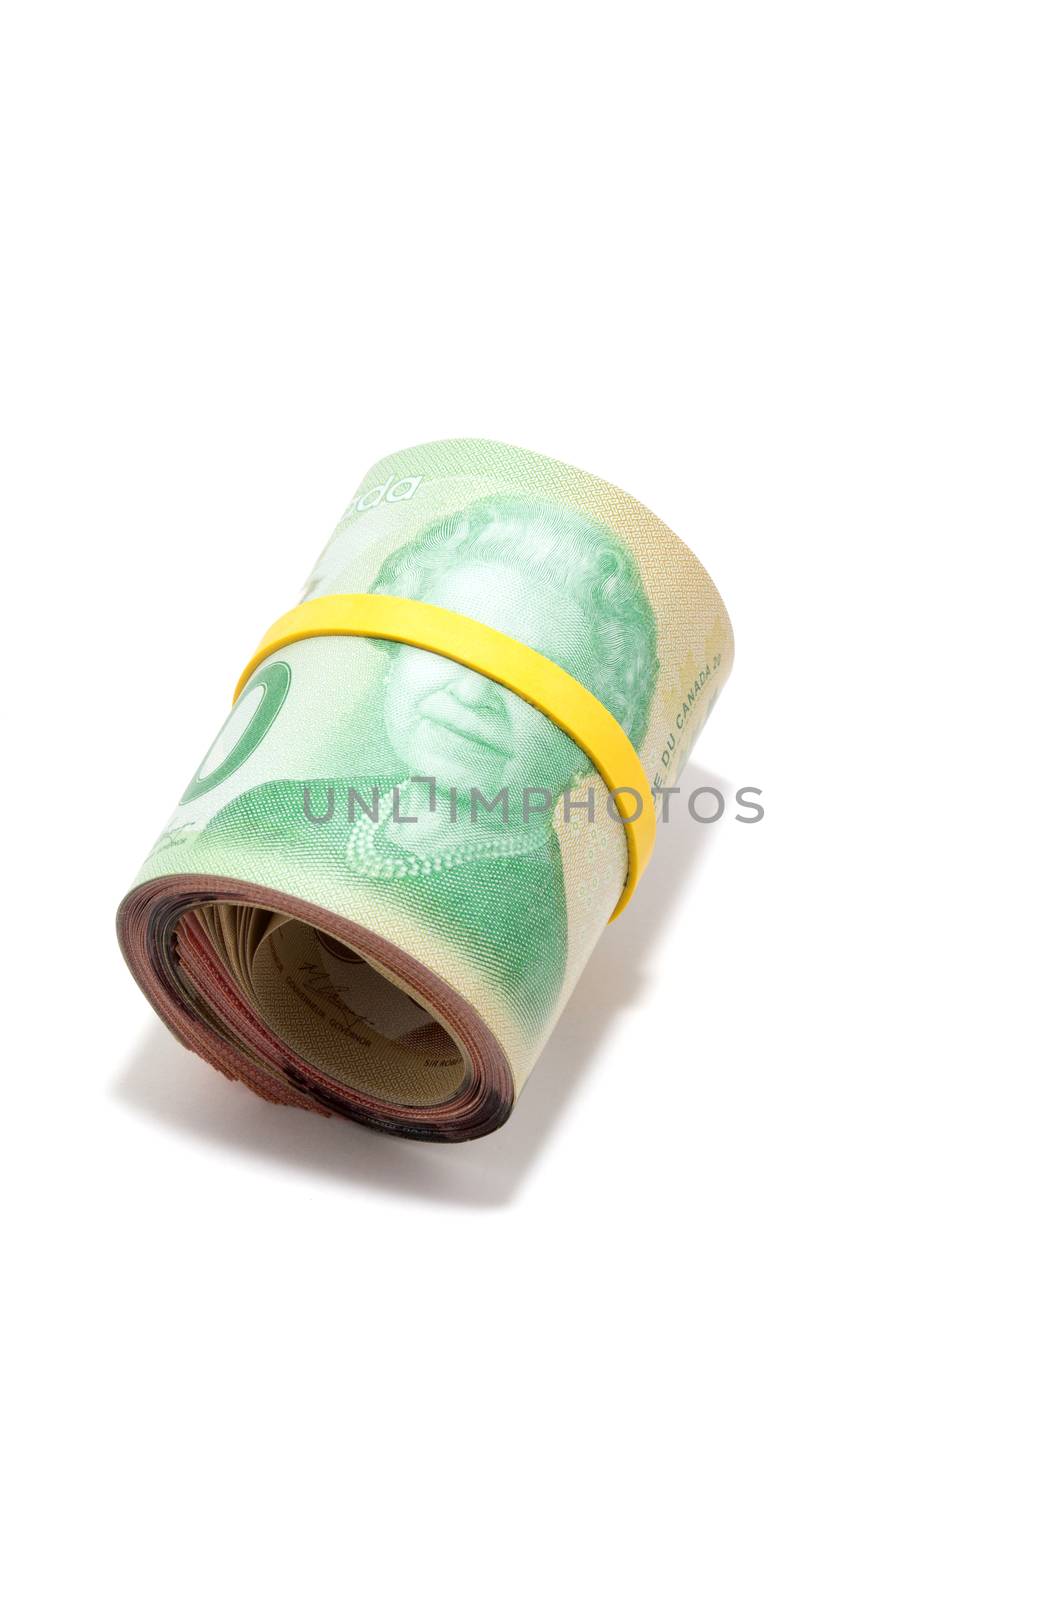 Roll of twenty Canadian dollars with yellow plastic band over the isolated on white background